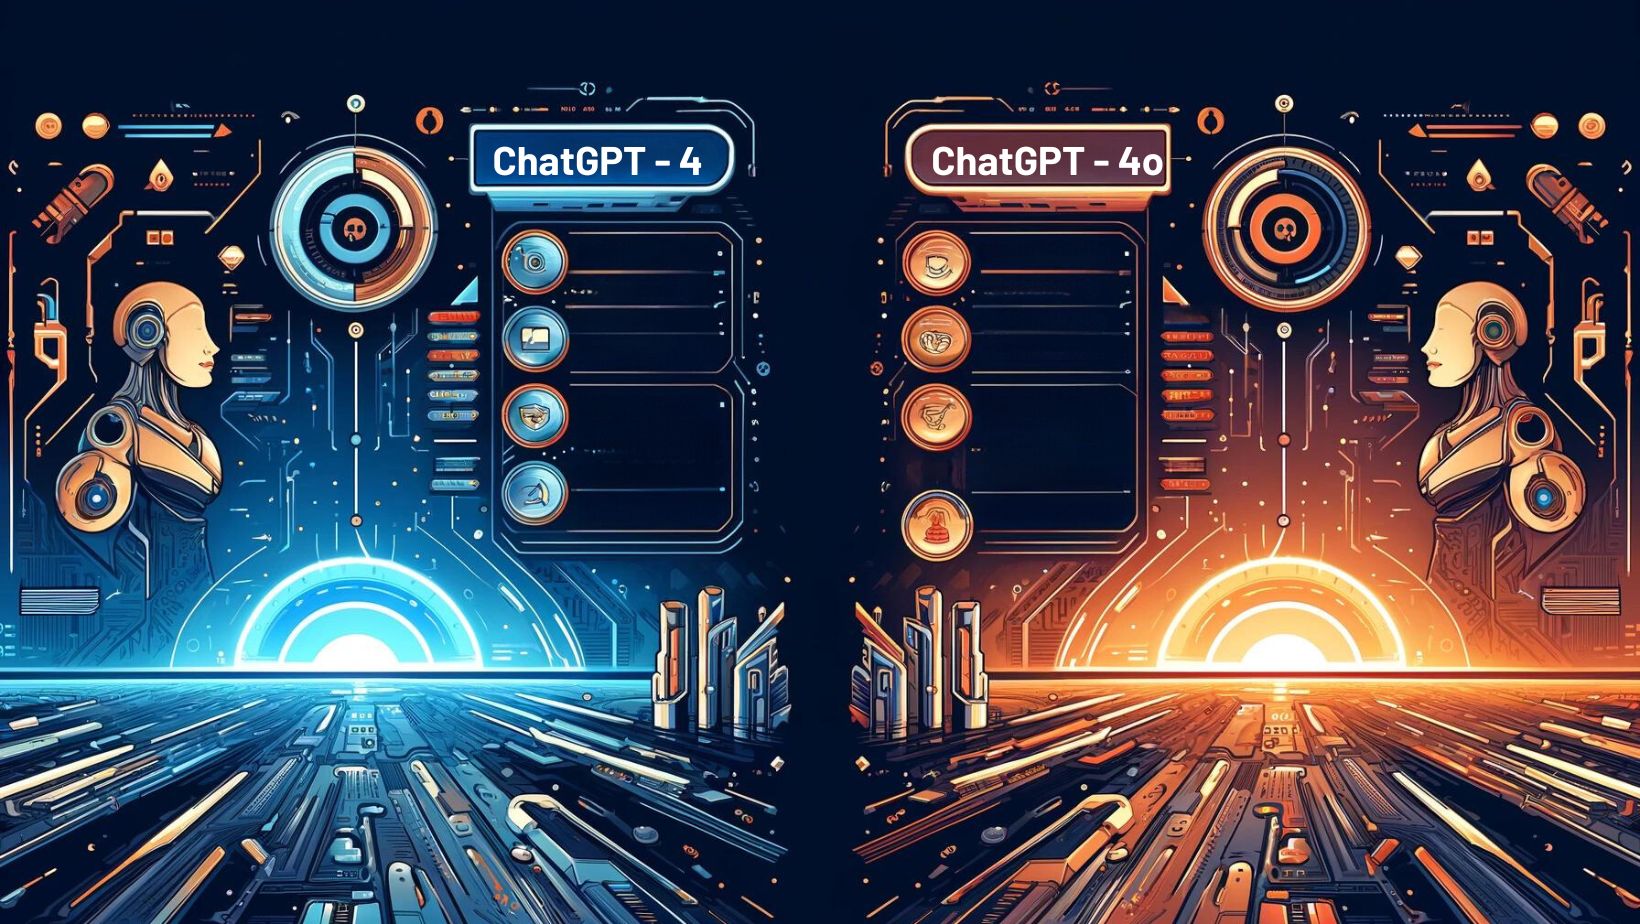 Visual Comparison Between ChatGPT-4 and ChatGPT-4o in Advanced AI Capabilities